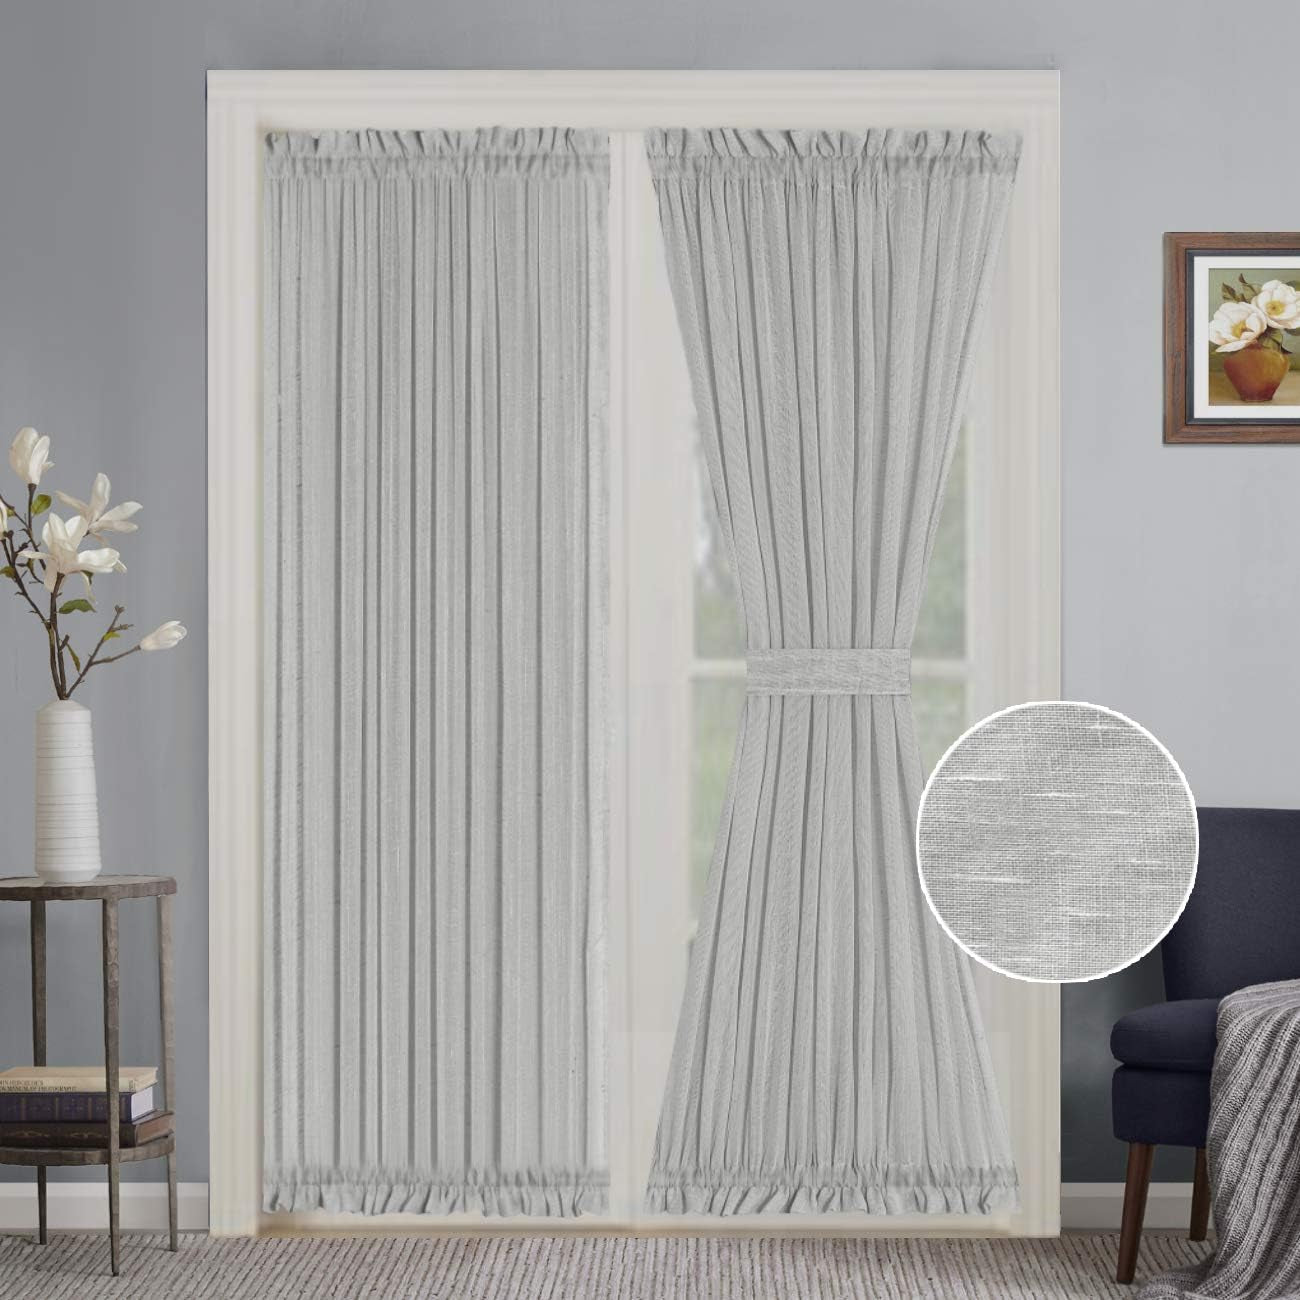 Turquoize Elegant Linen French Door Curtains Light Filtering Curtain Panels Rod Pocket Linen Panel for Glass Door with Tie-Back Privacy Assured Semi Sheer Door Panels, 52"W by 72"L, 2 Panels, Natural  Turquoize Dove Gray W52 L72 